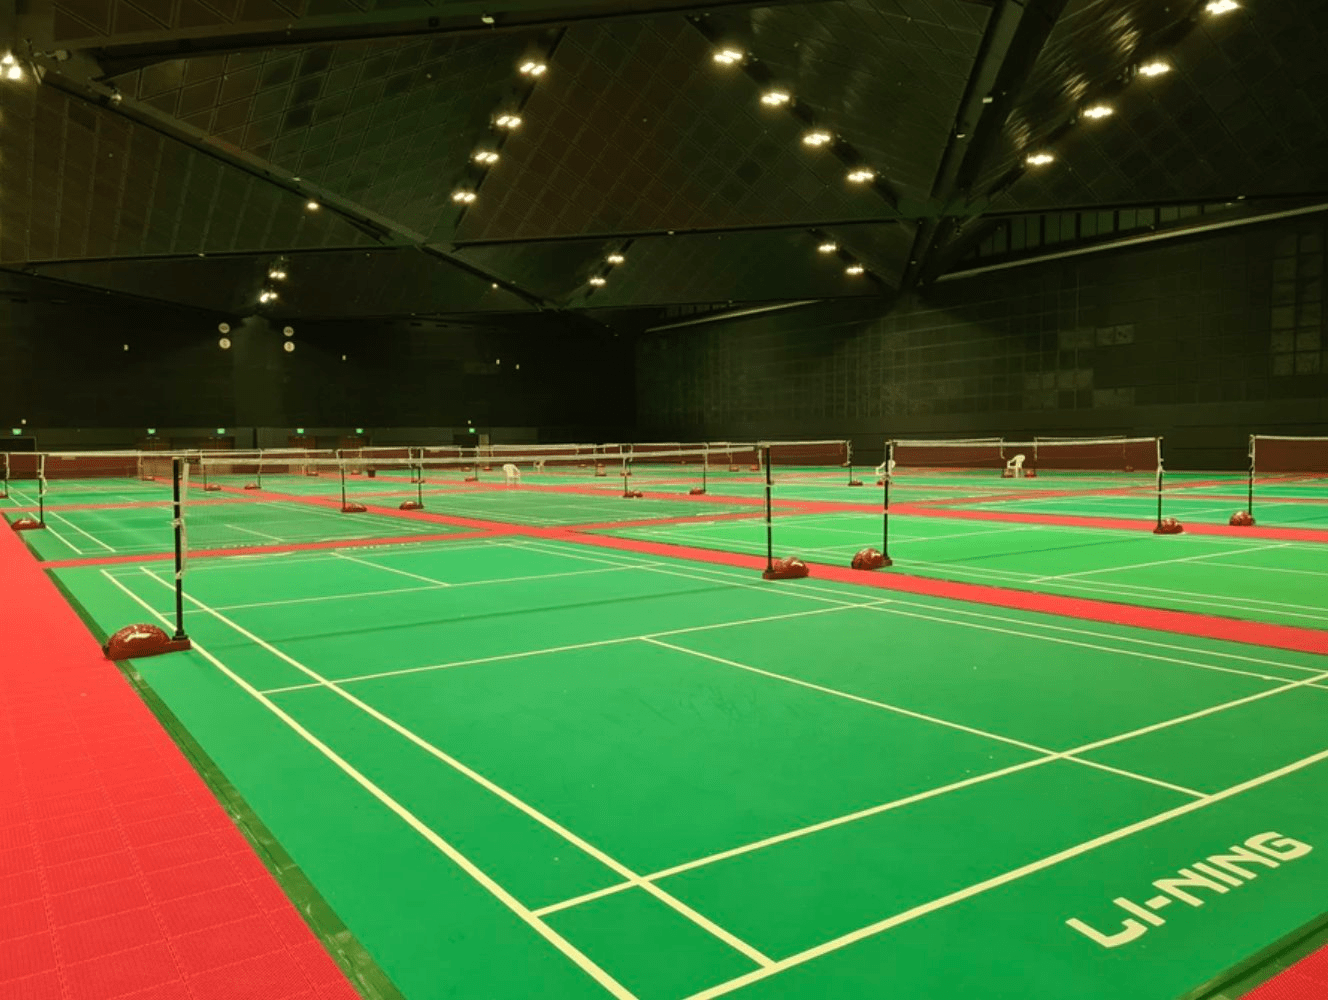 Things To Do In January 2022 - Teamsport Arena @ Suntec